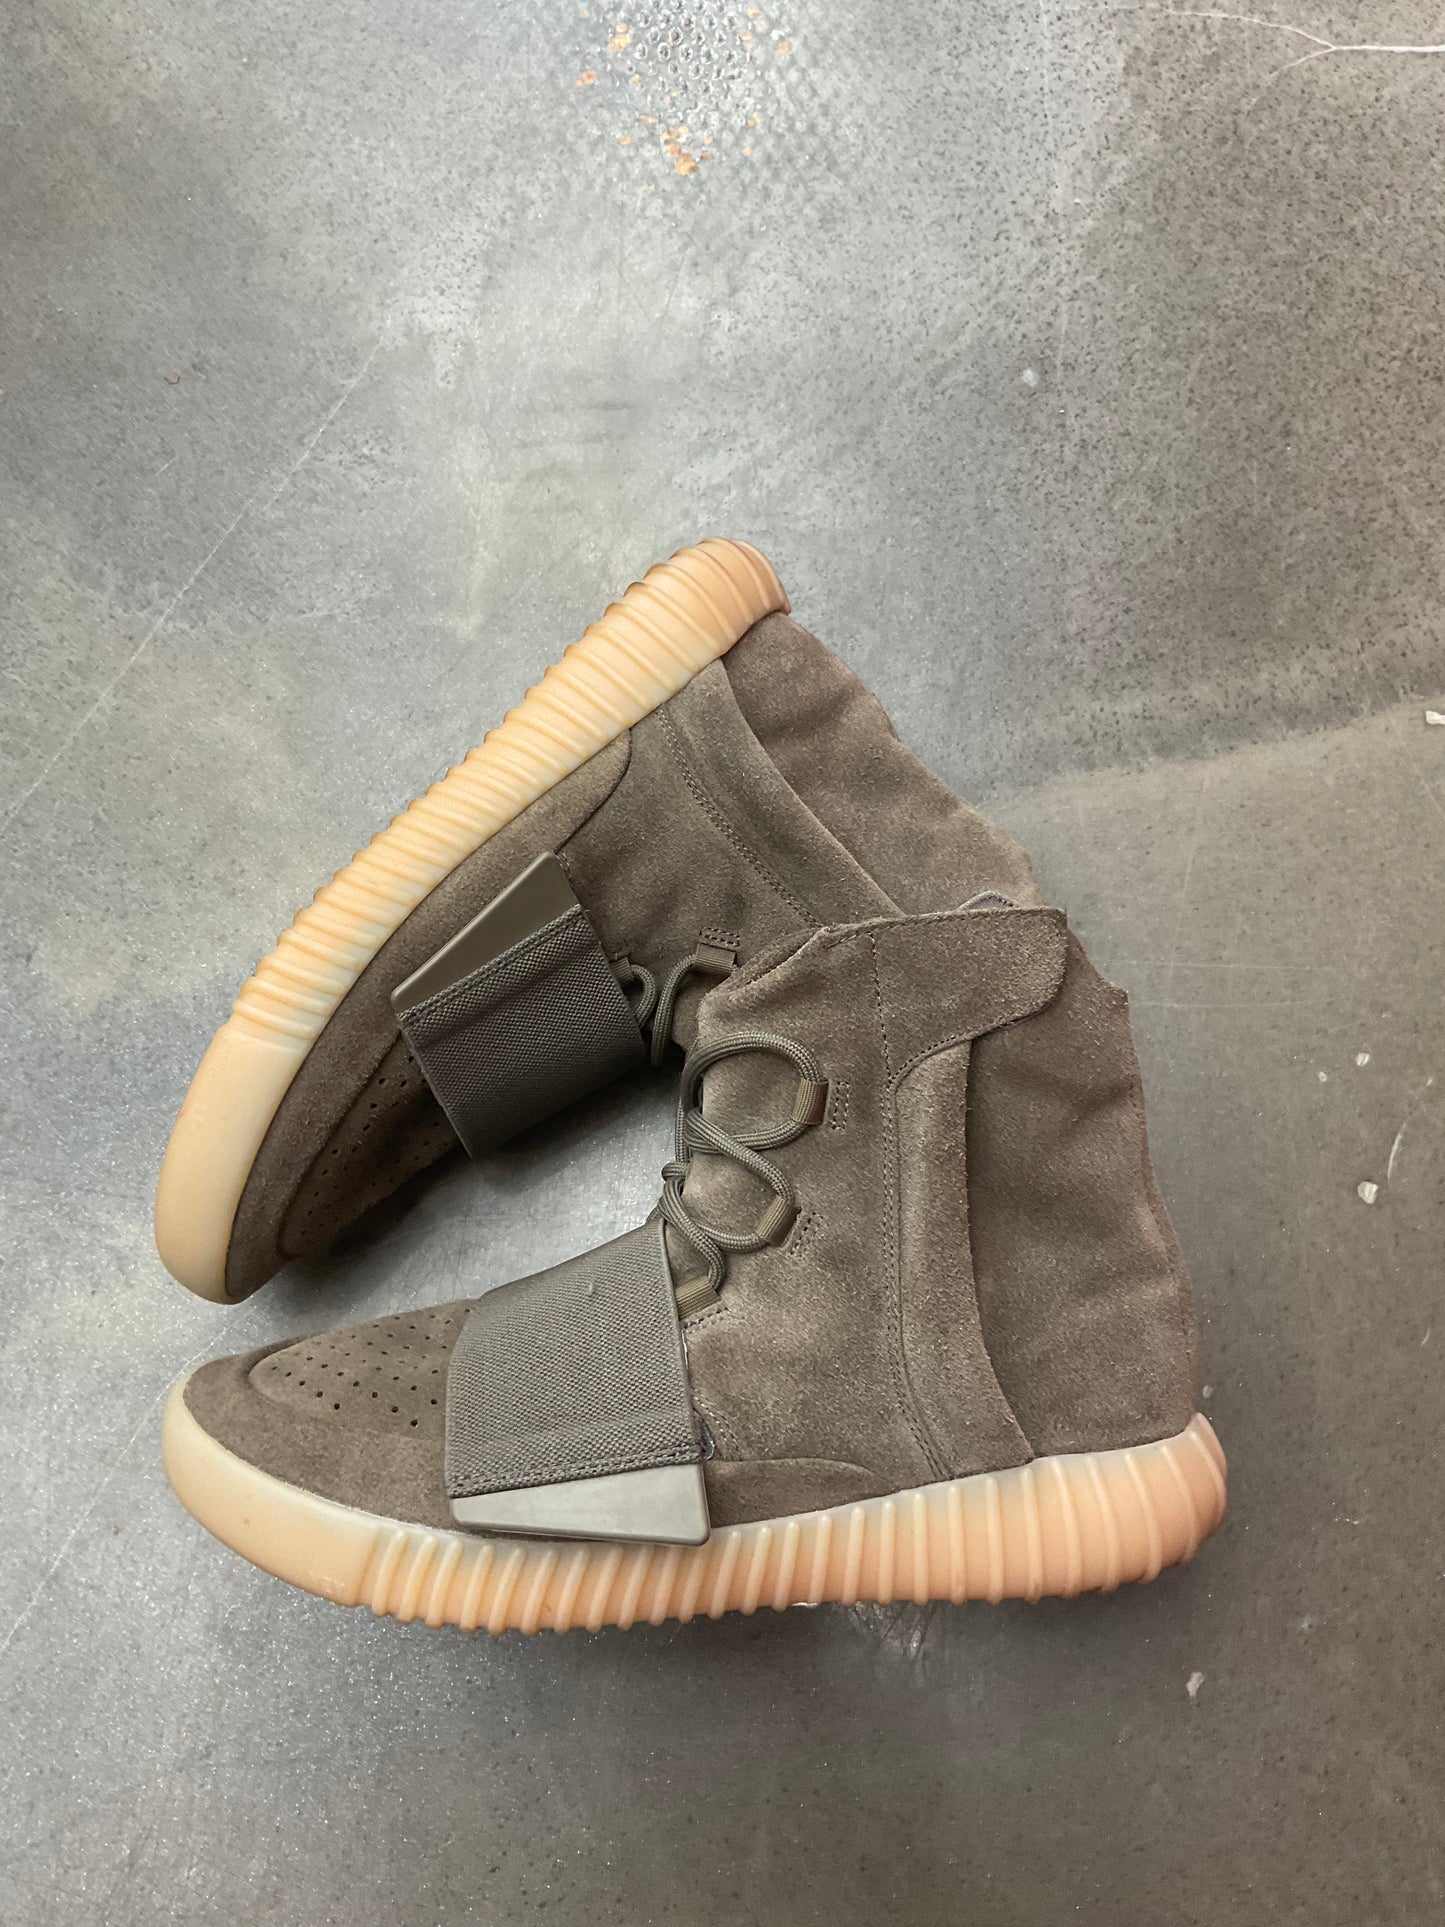 Pre-owned adidas Yeezy Boost 750 Chocolate Size 9.5 NO BOX